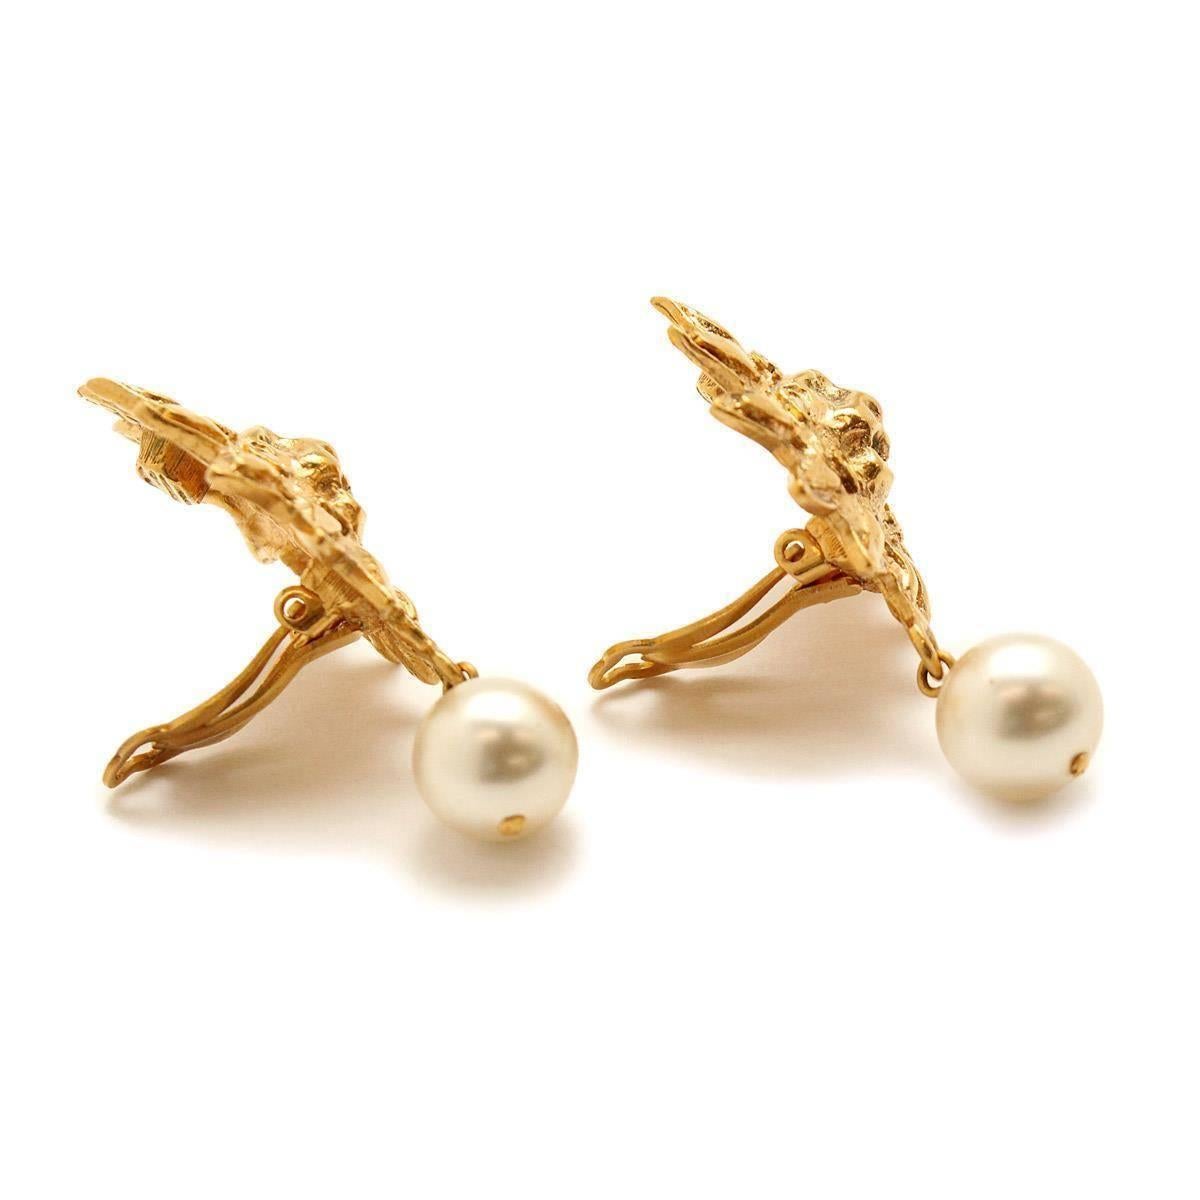 CURATOR'S NOTES

Metal
Gold tone
Faux pearl
Clip on closure
Width 1.5